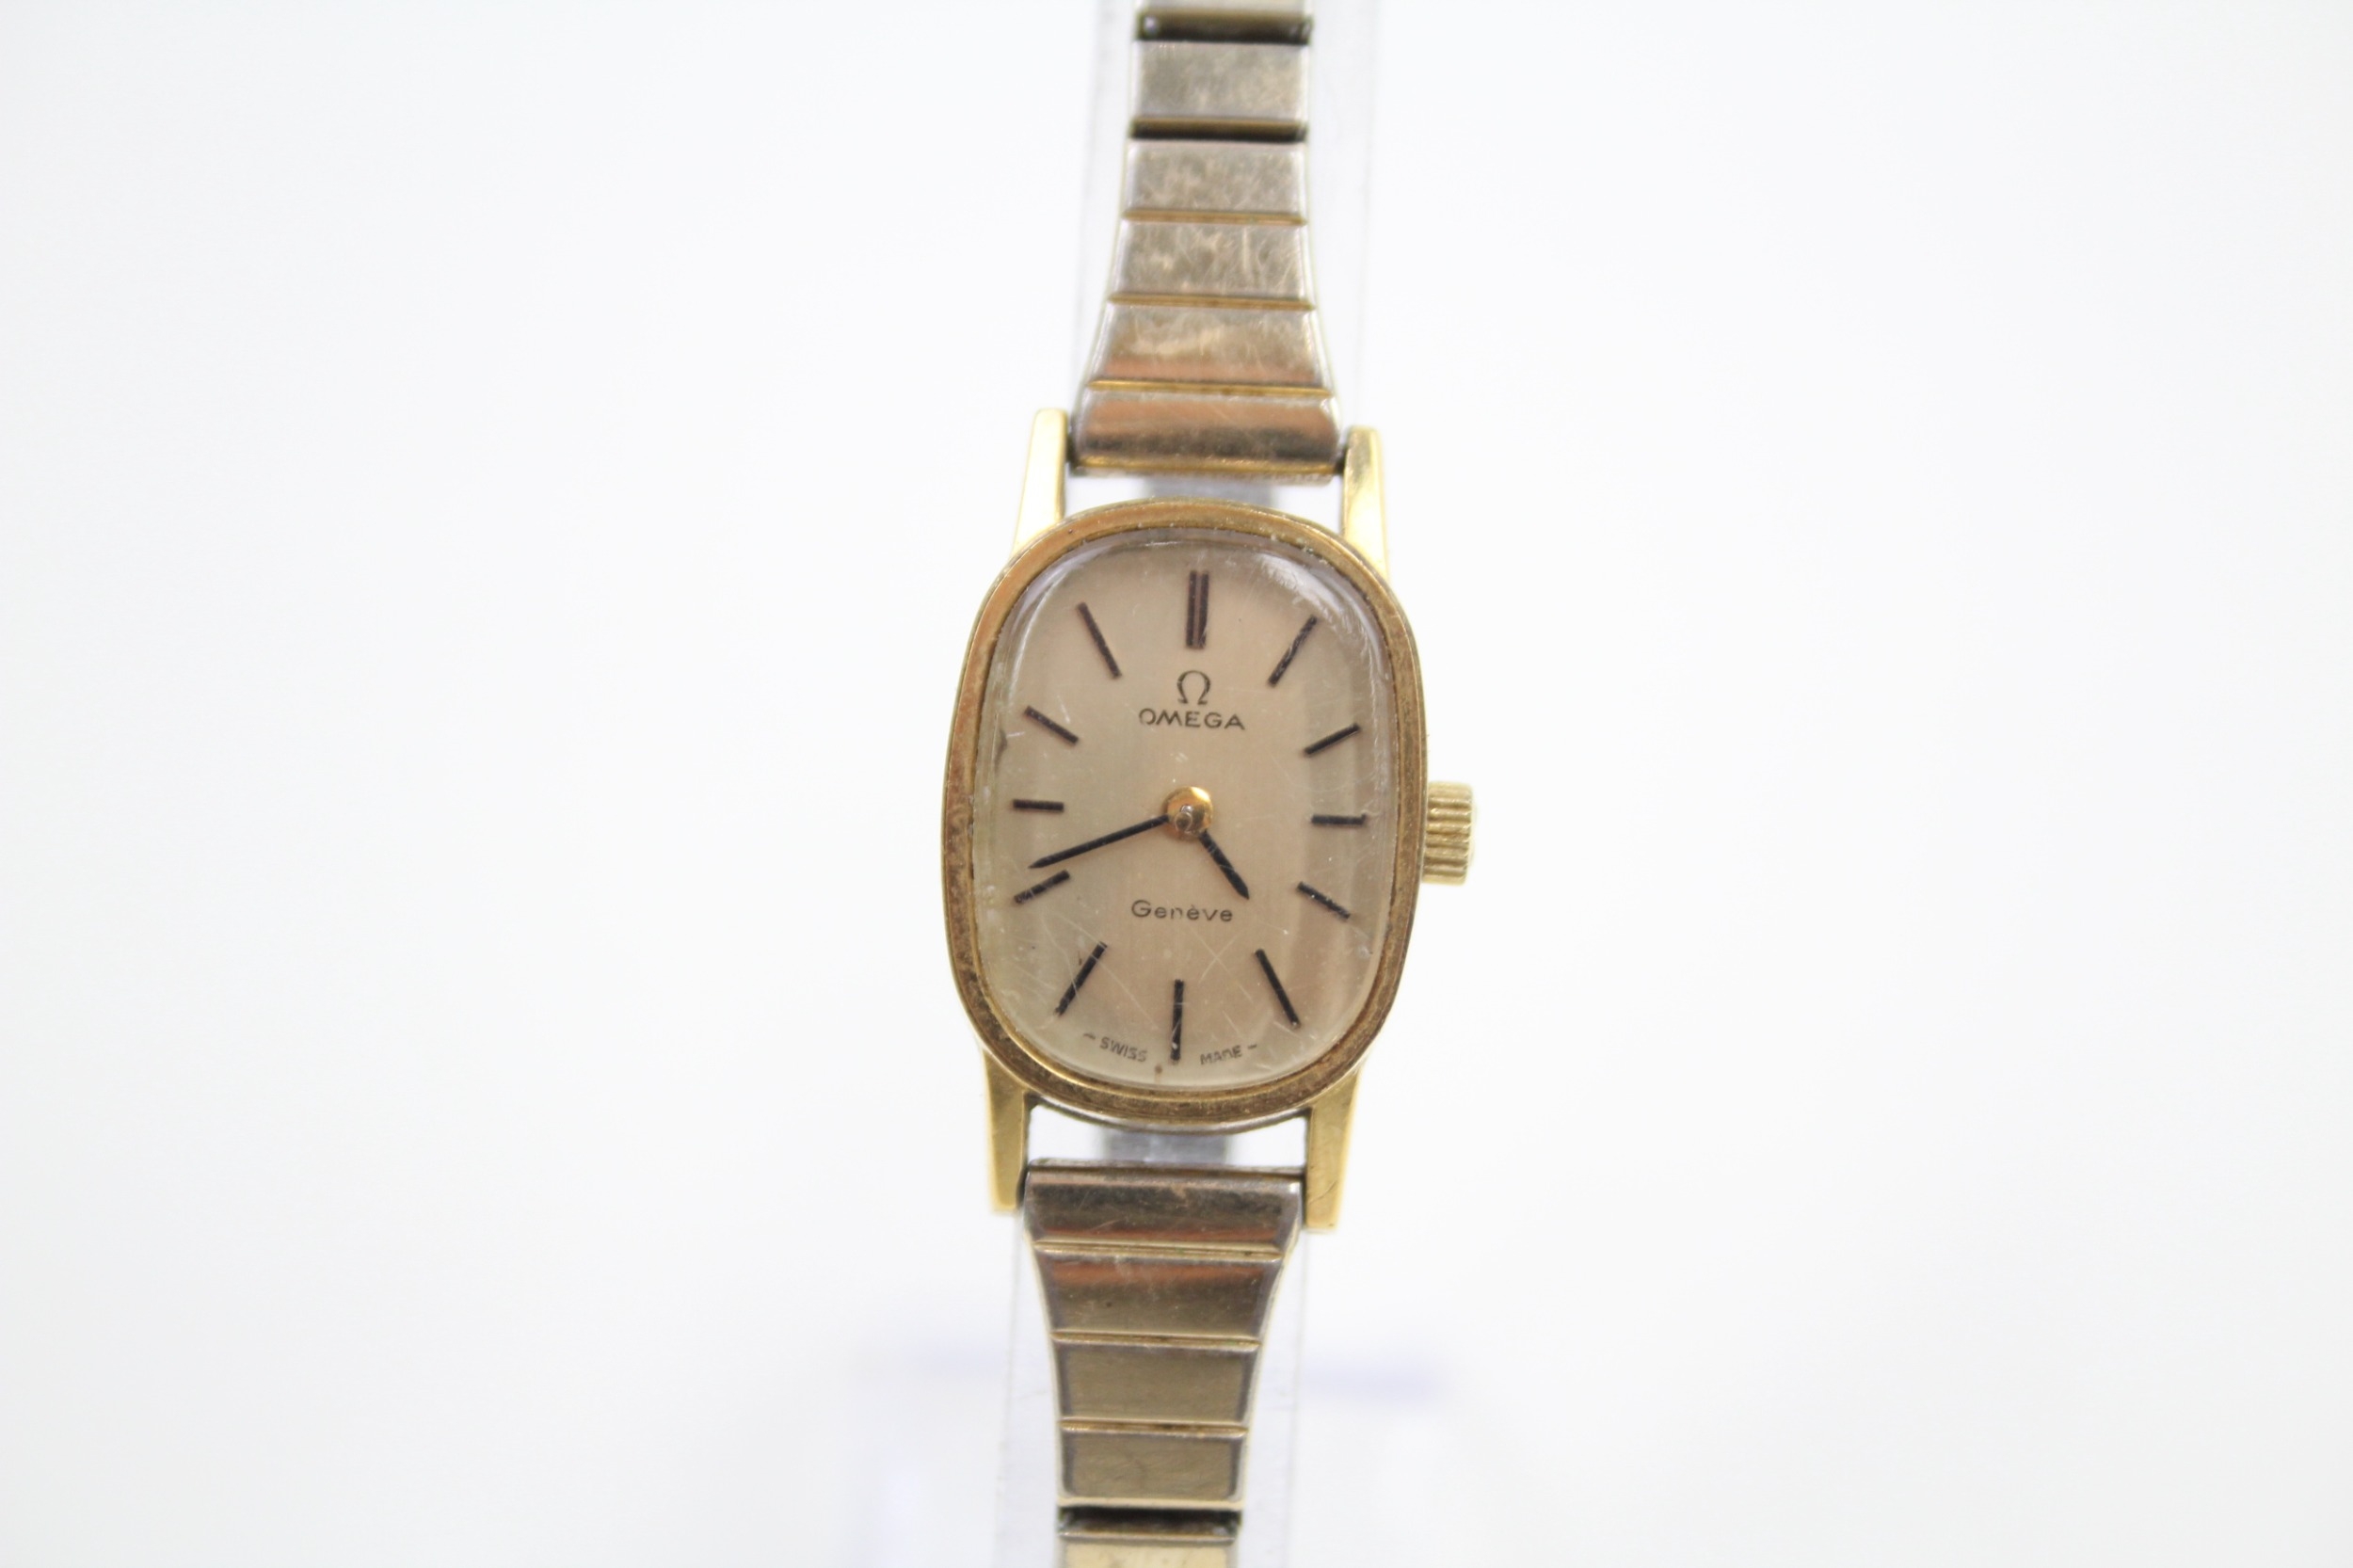 Womens Omega Geneve Gold Tone Wristwatch Hand Wind WORKING - Image 2 of 7